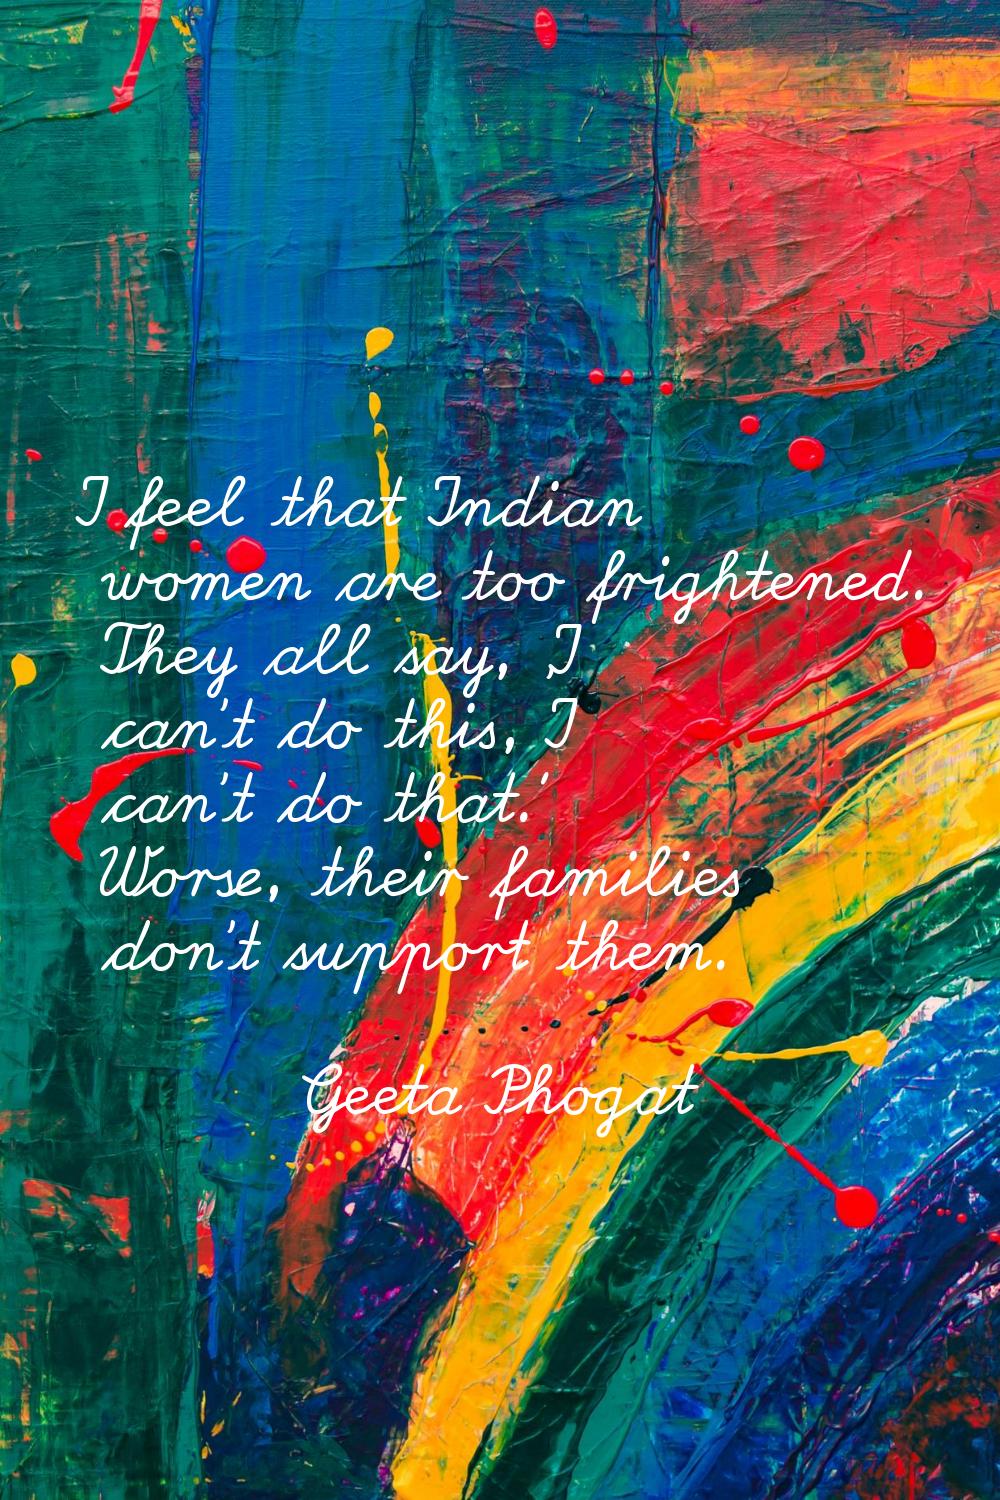 I feel that Indian women are too frightened. They all say, 'I can't do this, I can't do that.' Wors